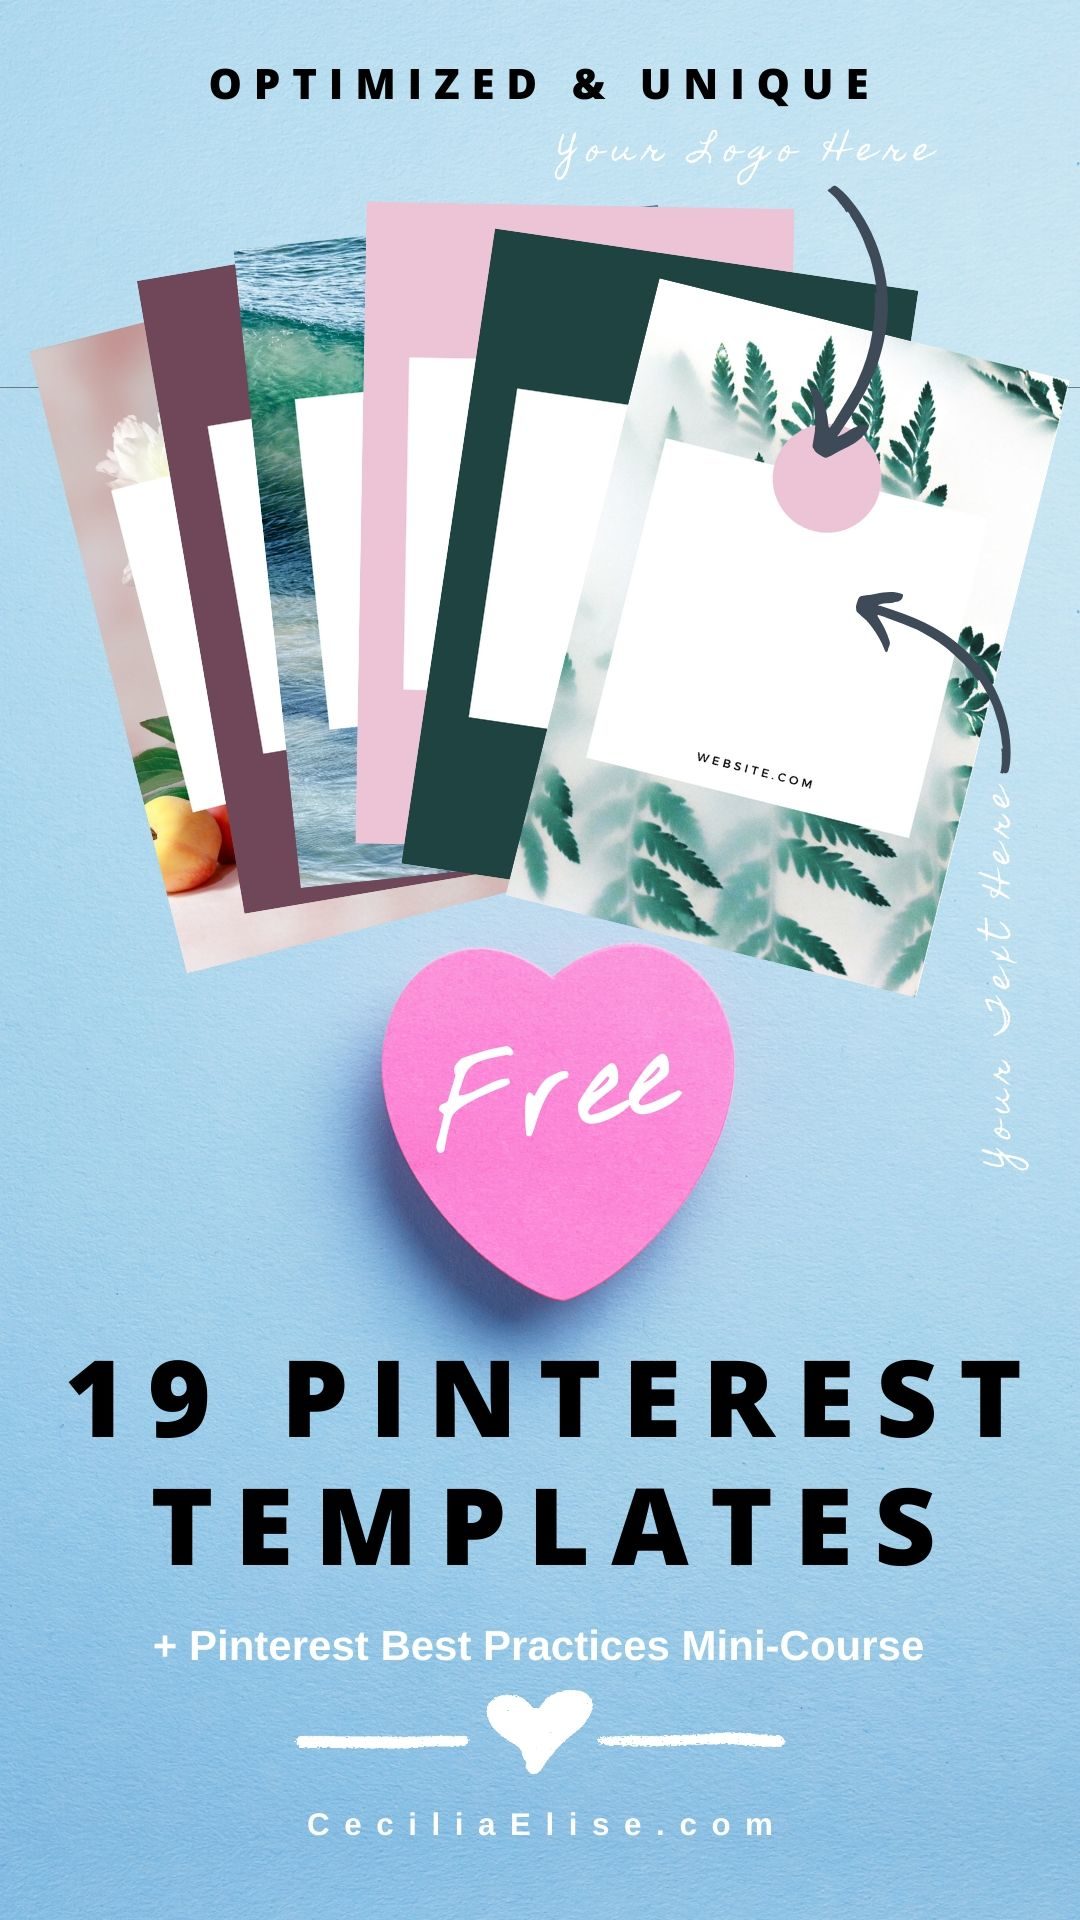 Free Pinterest Templates for Canva